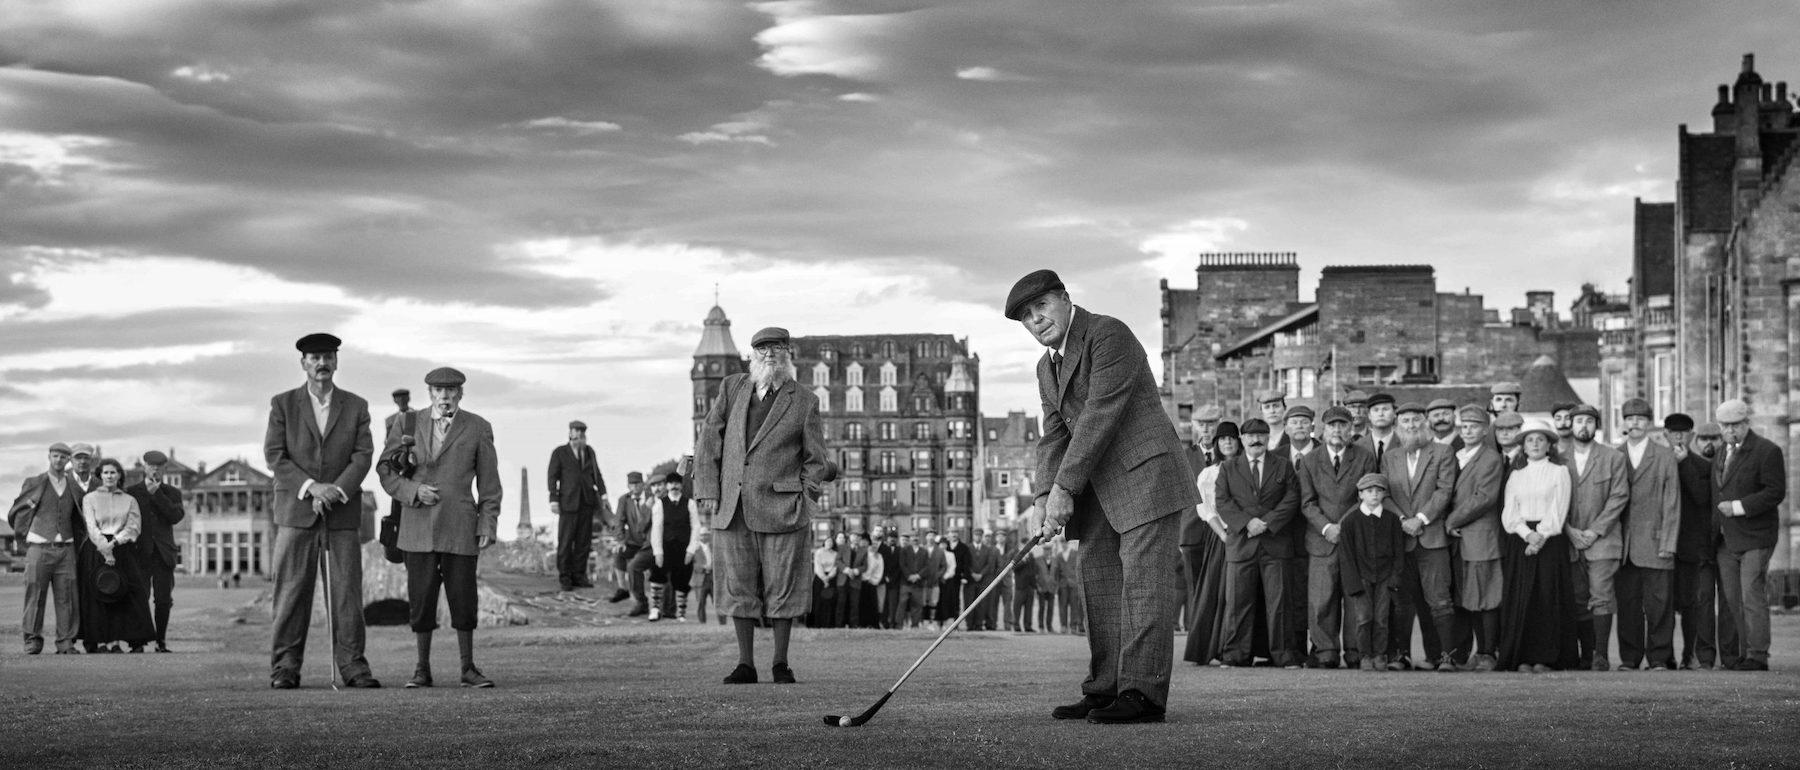 David Yarrow Black and White Photograph - The Home of Golf 